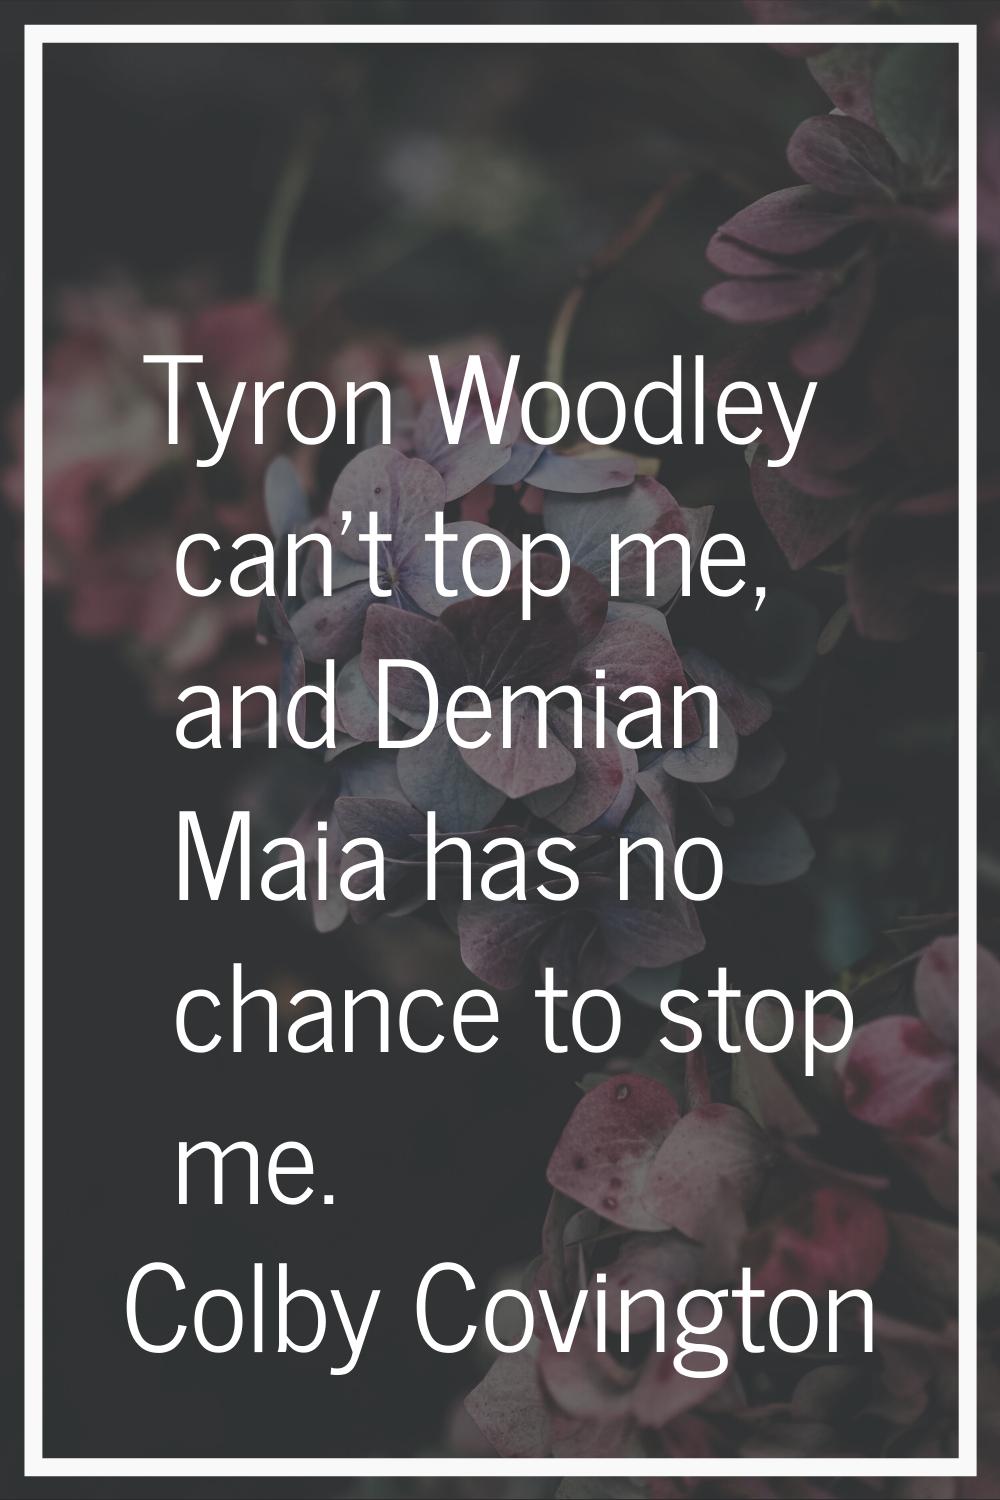 Tyron Woodley can't top me, and Demian Maia has no chance to stop me.